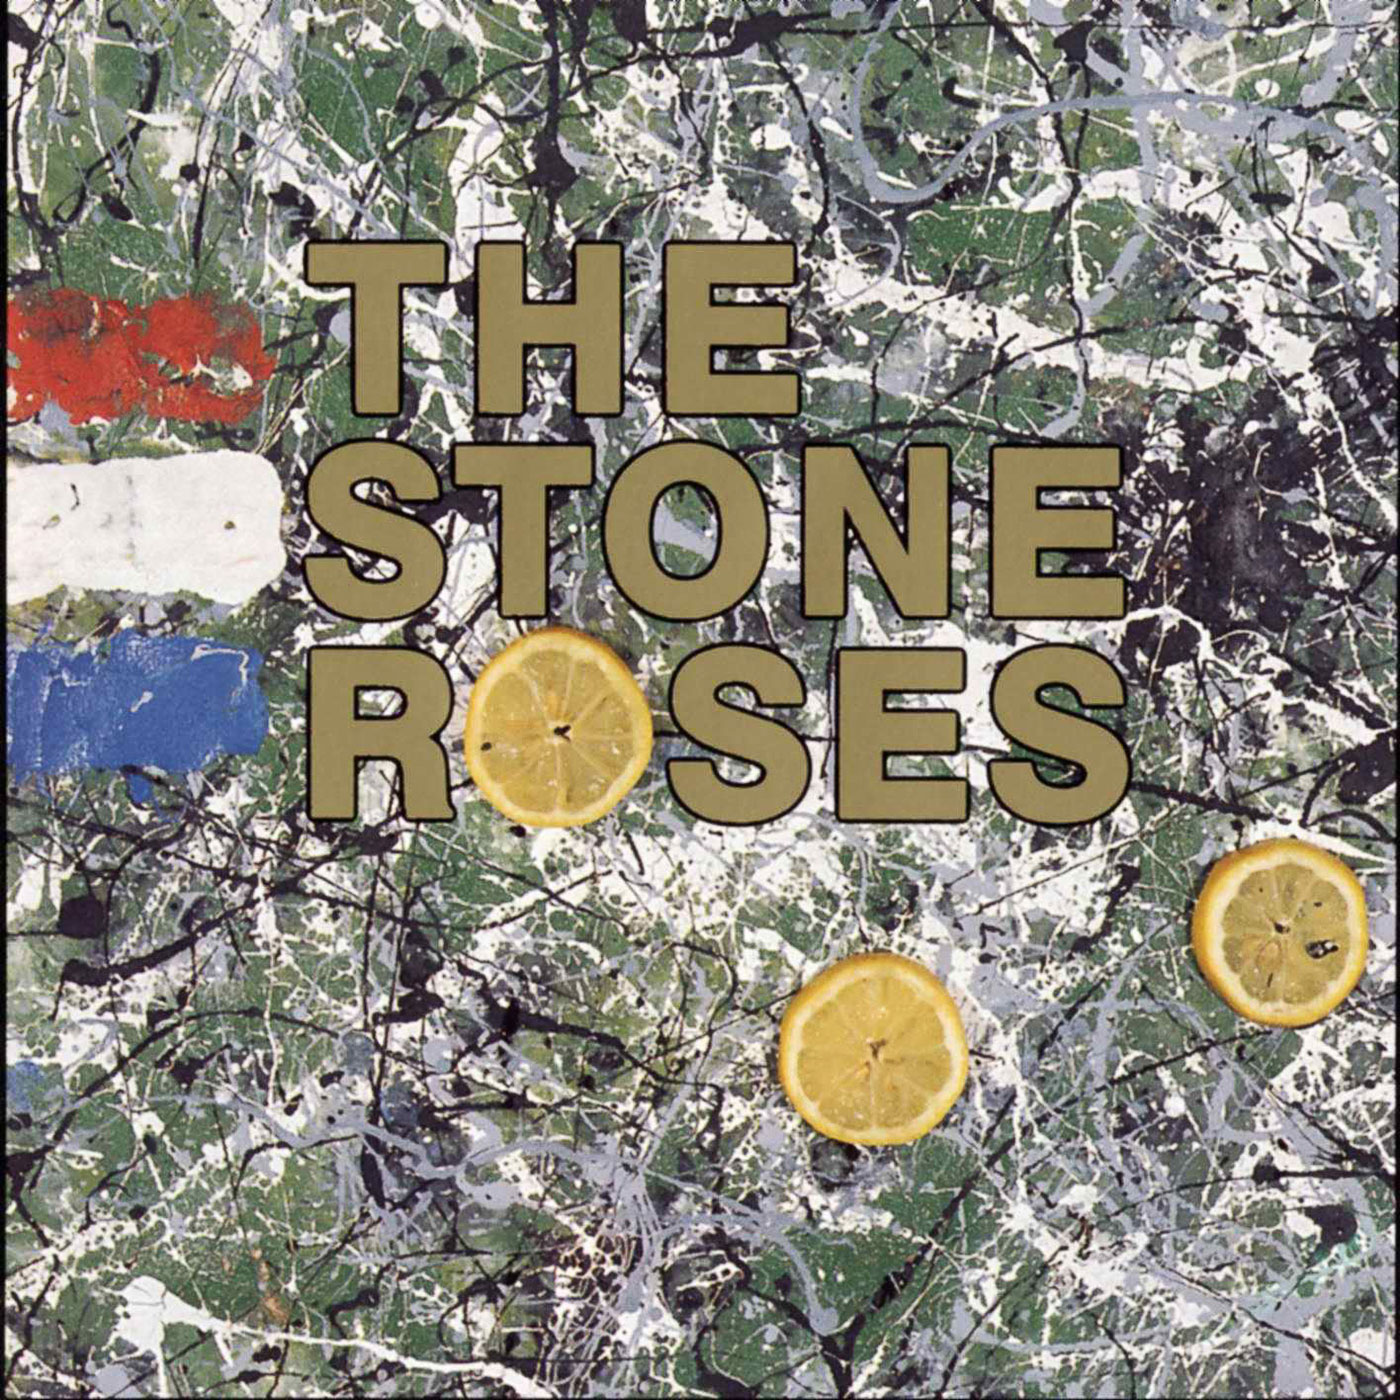 647 The Stone Roses – The Stone Roses